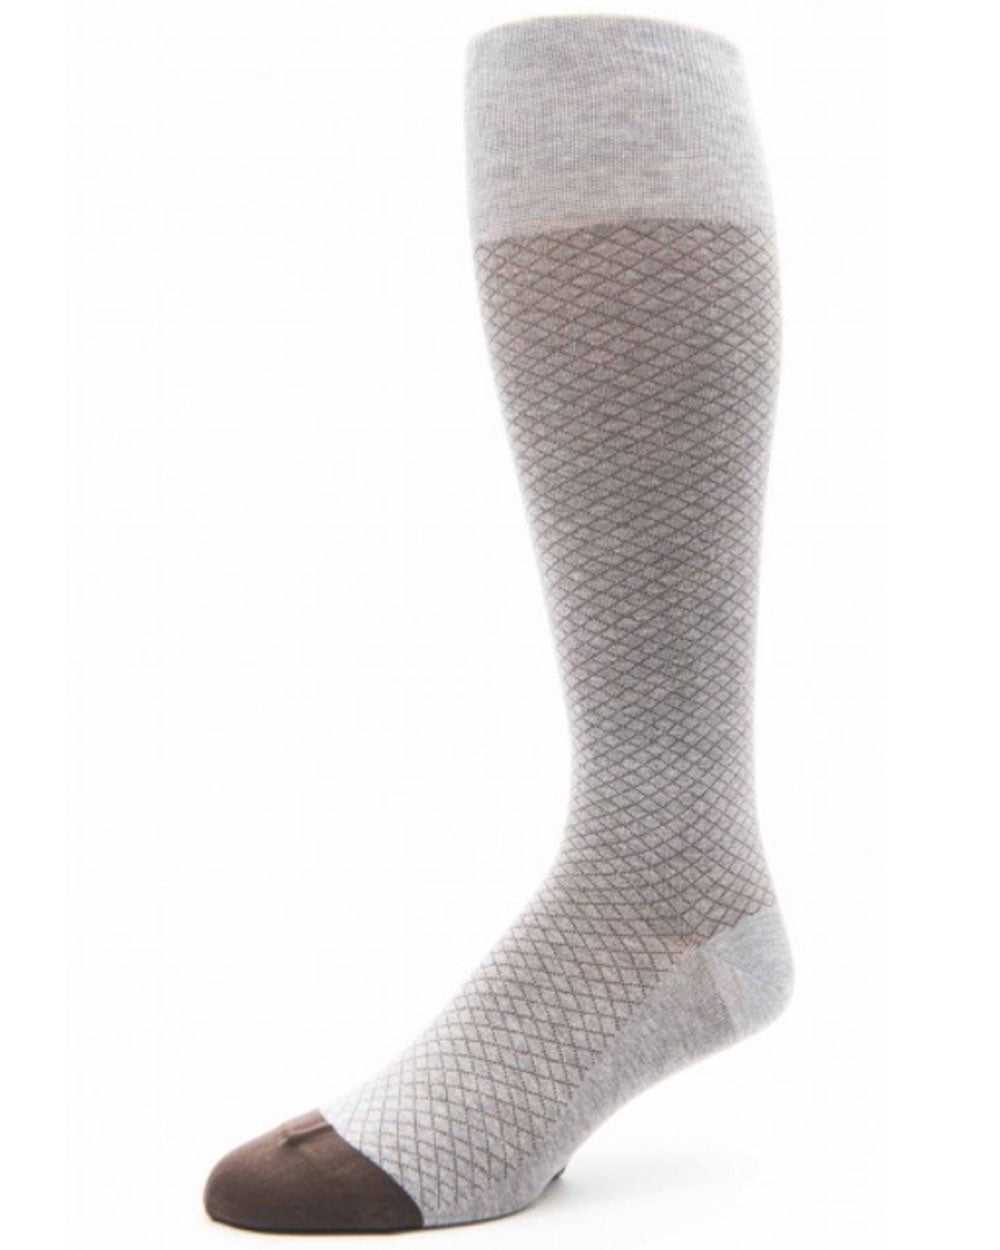 Check Over the Calf Socks in Grey and Brown